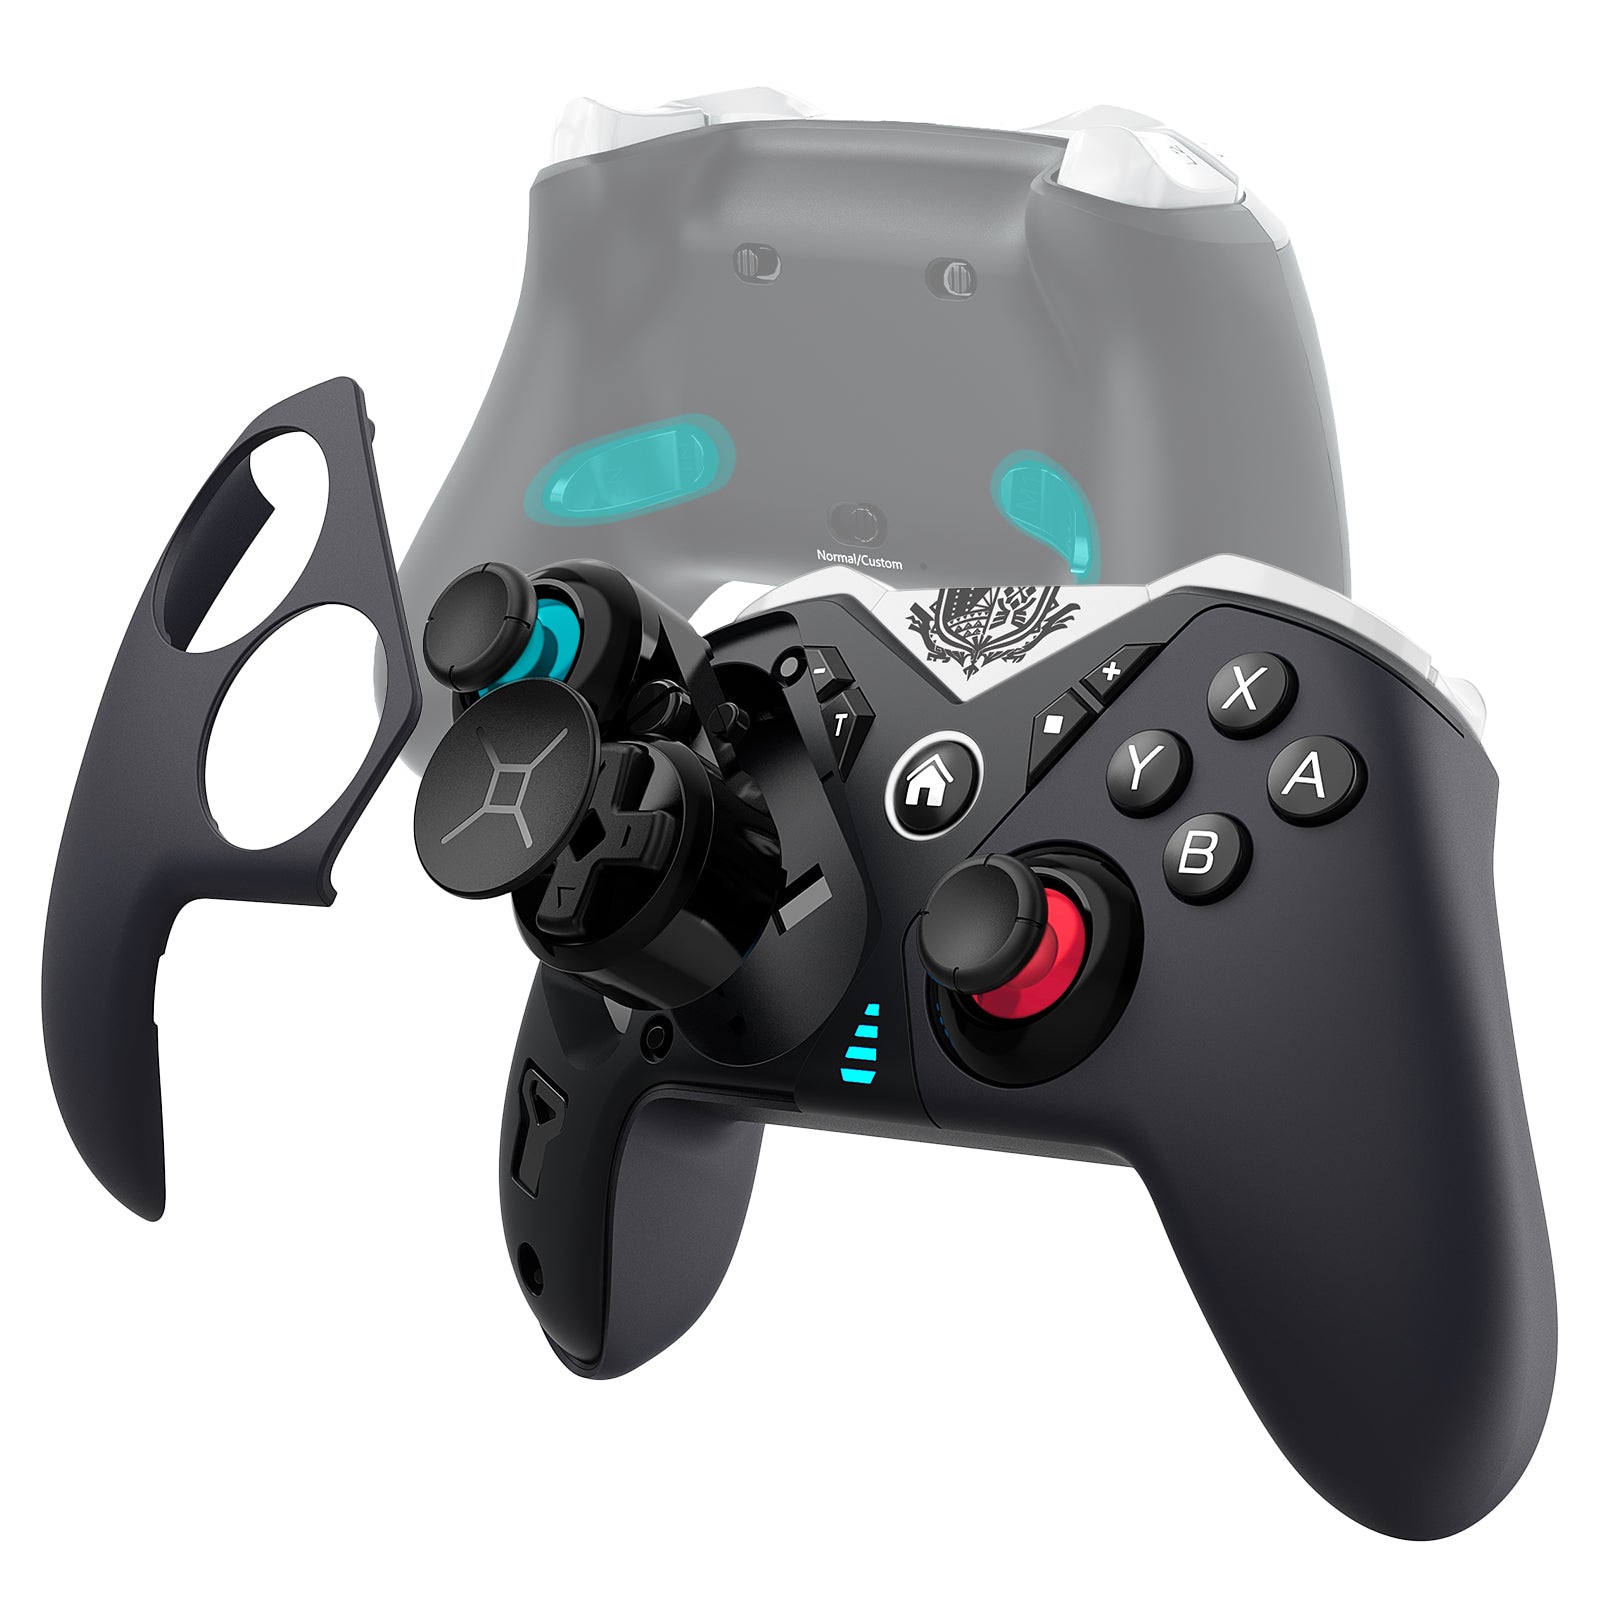 NexiGo Elite Switch Pro controller with 4 back buttons. Compatible with Nintendo Switch/Lite/OLED.